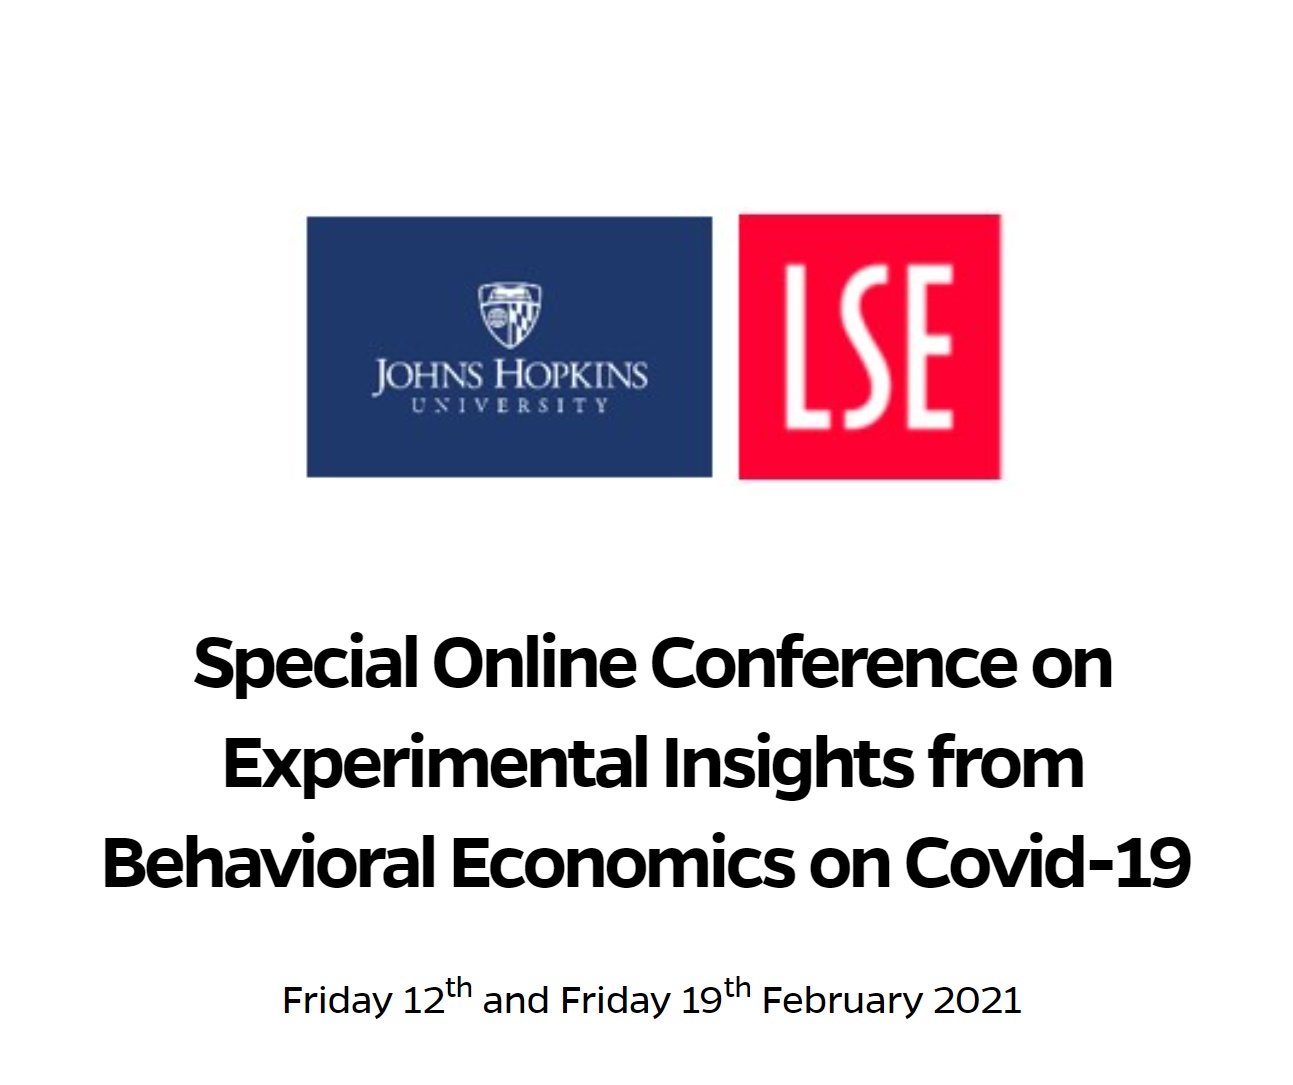 JHU and LSE Behavioural Economics and Covid 19 event